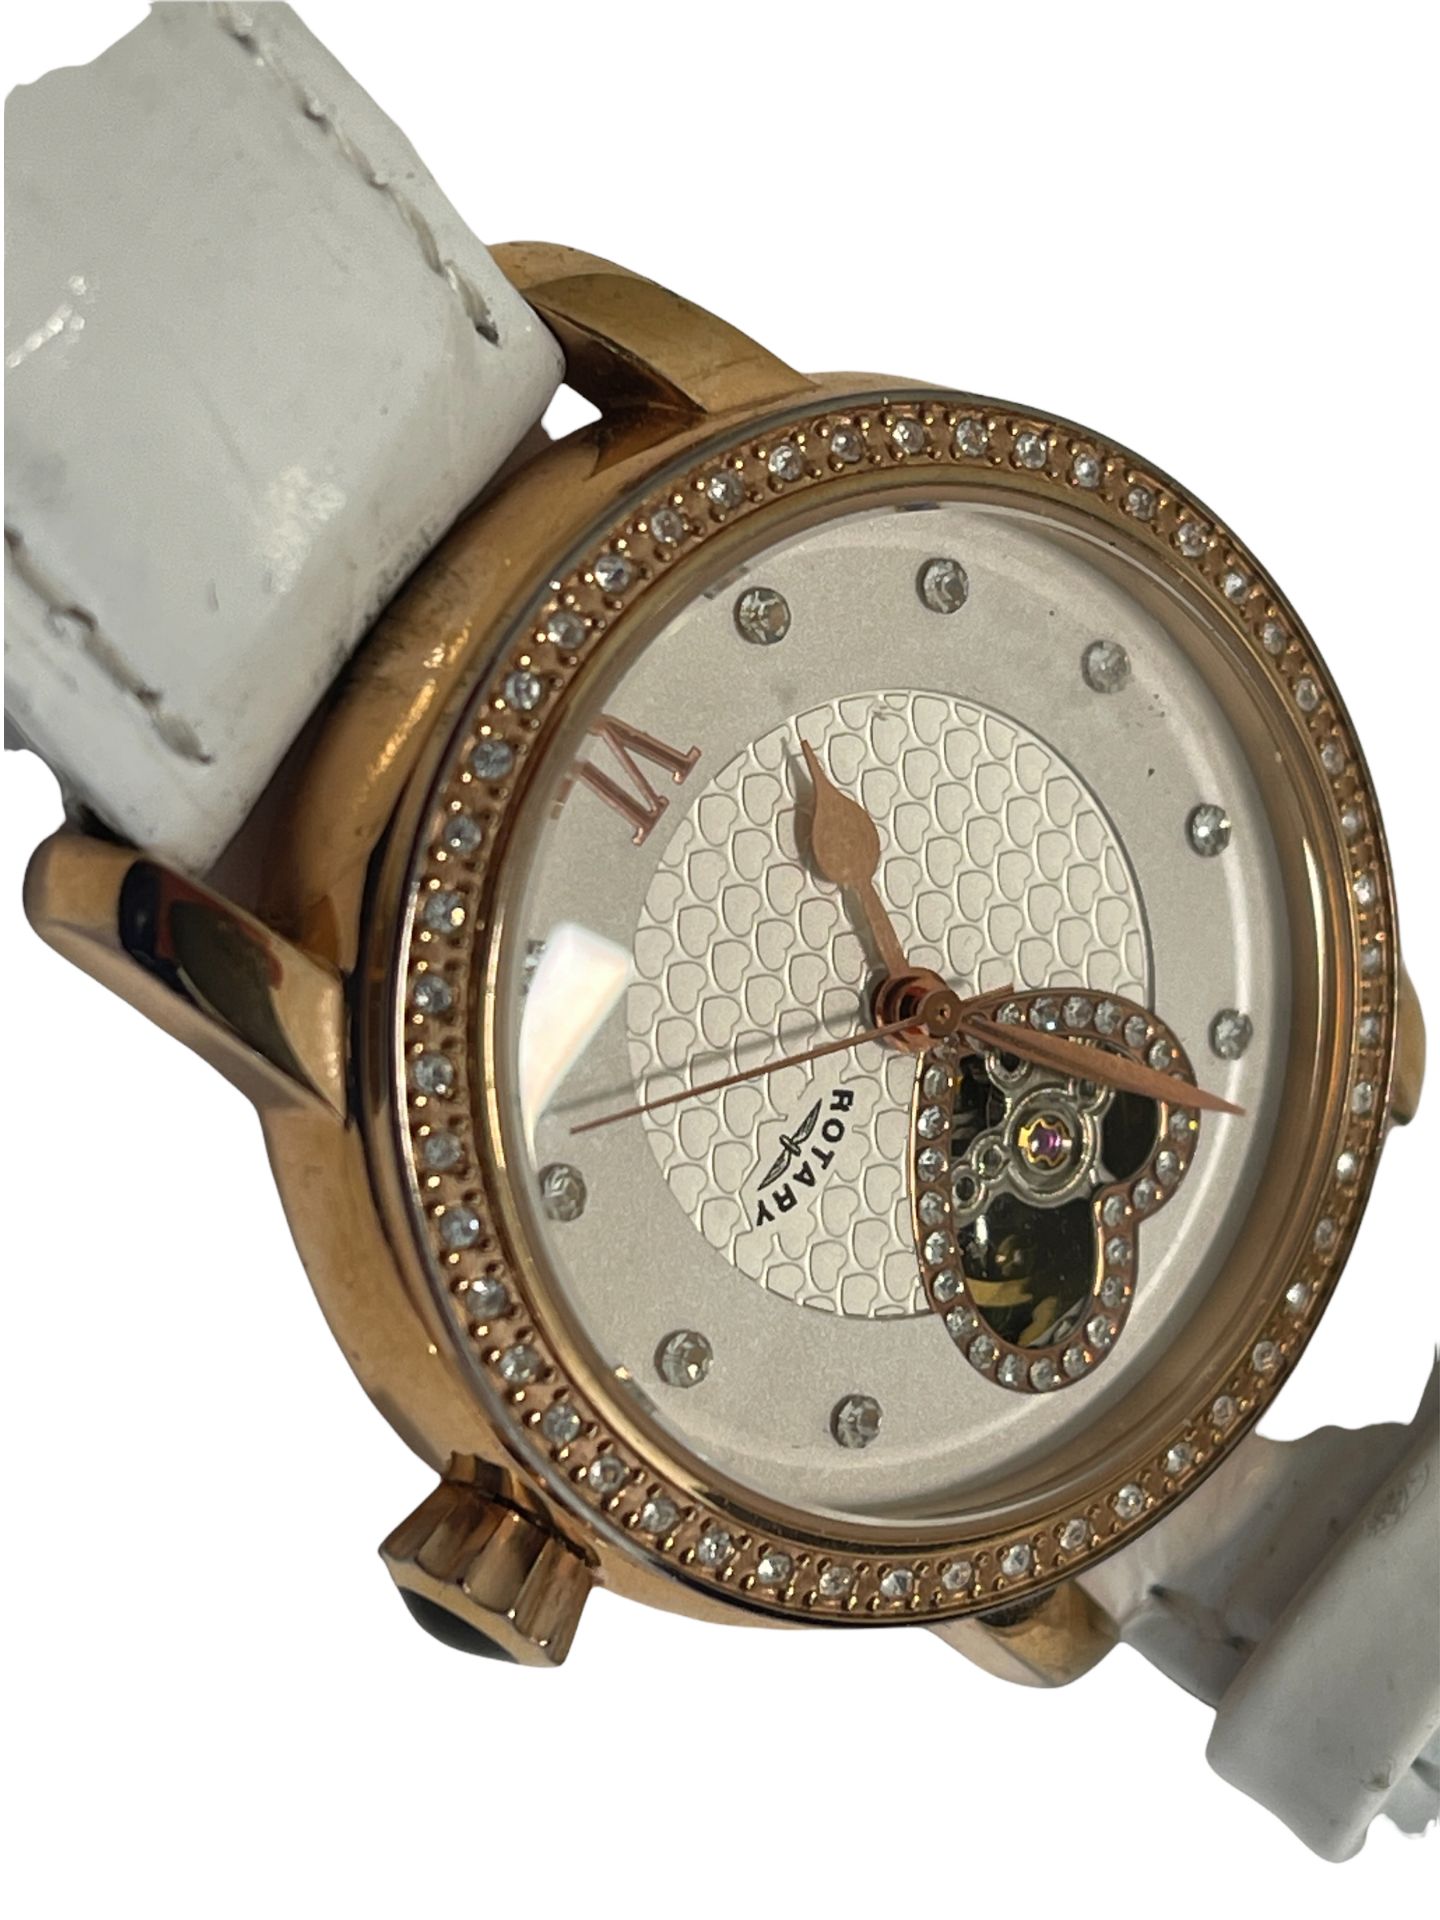 Lost property From our private jet charter. Ladies gold Rotary automatic - Image 3 of 7